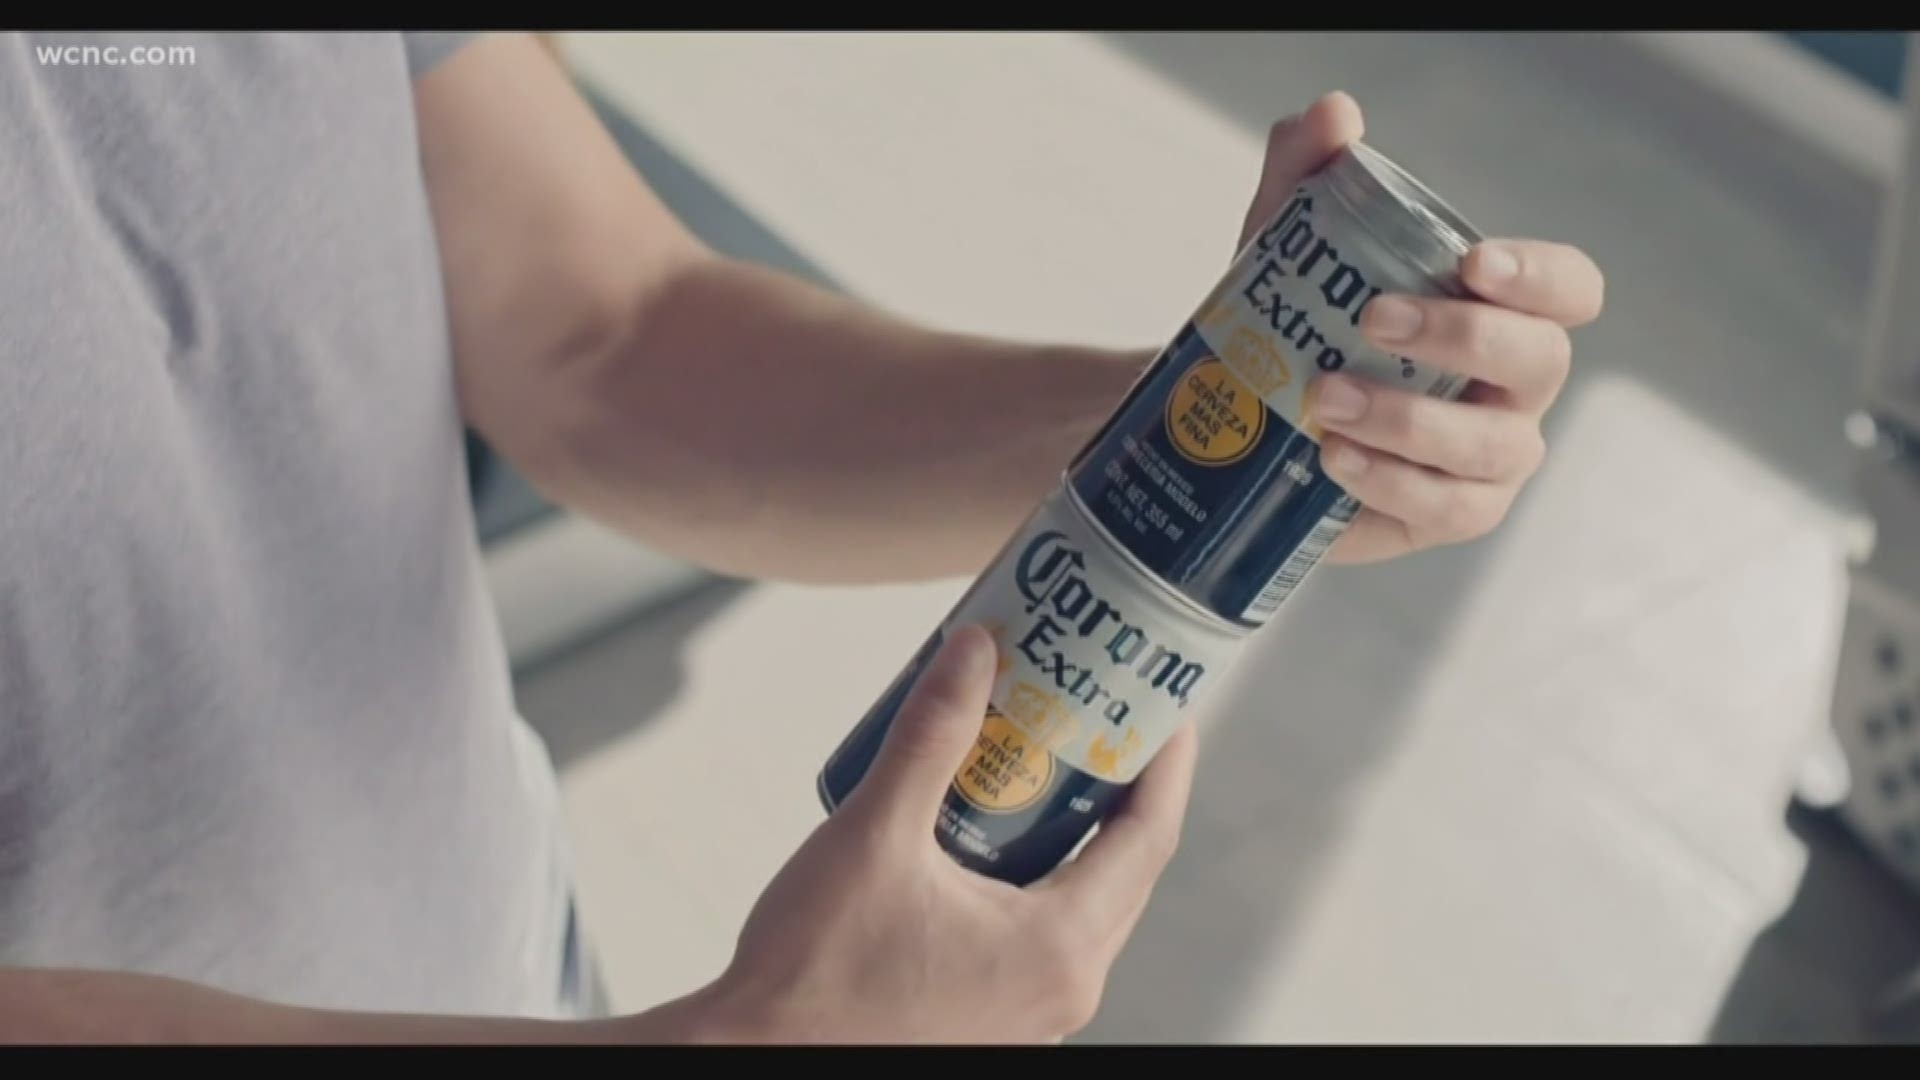 Corona is hoping to make six-packs a thing of the past. The popular beer unveiled new stackable cans that are designed to have an interlocking feature to eliminate those plastic rings that are so harmful for the environment.